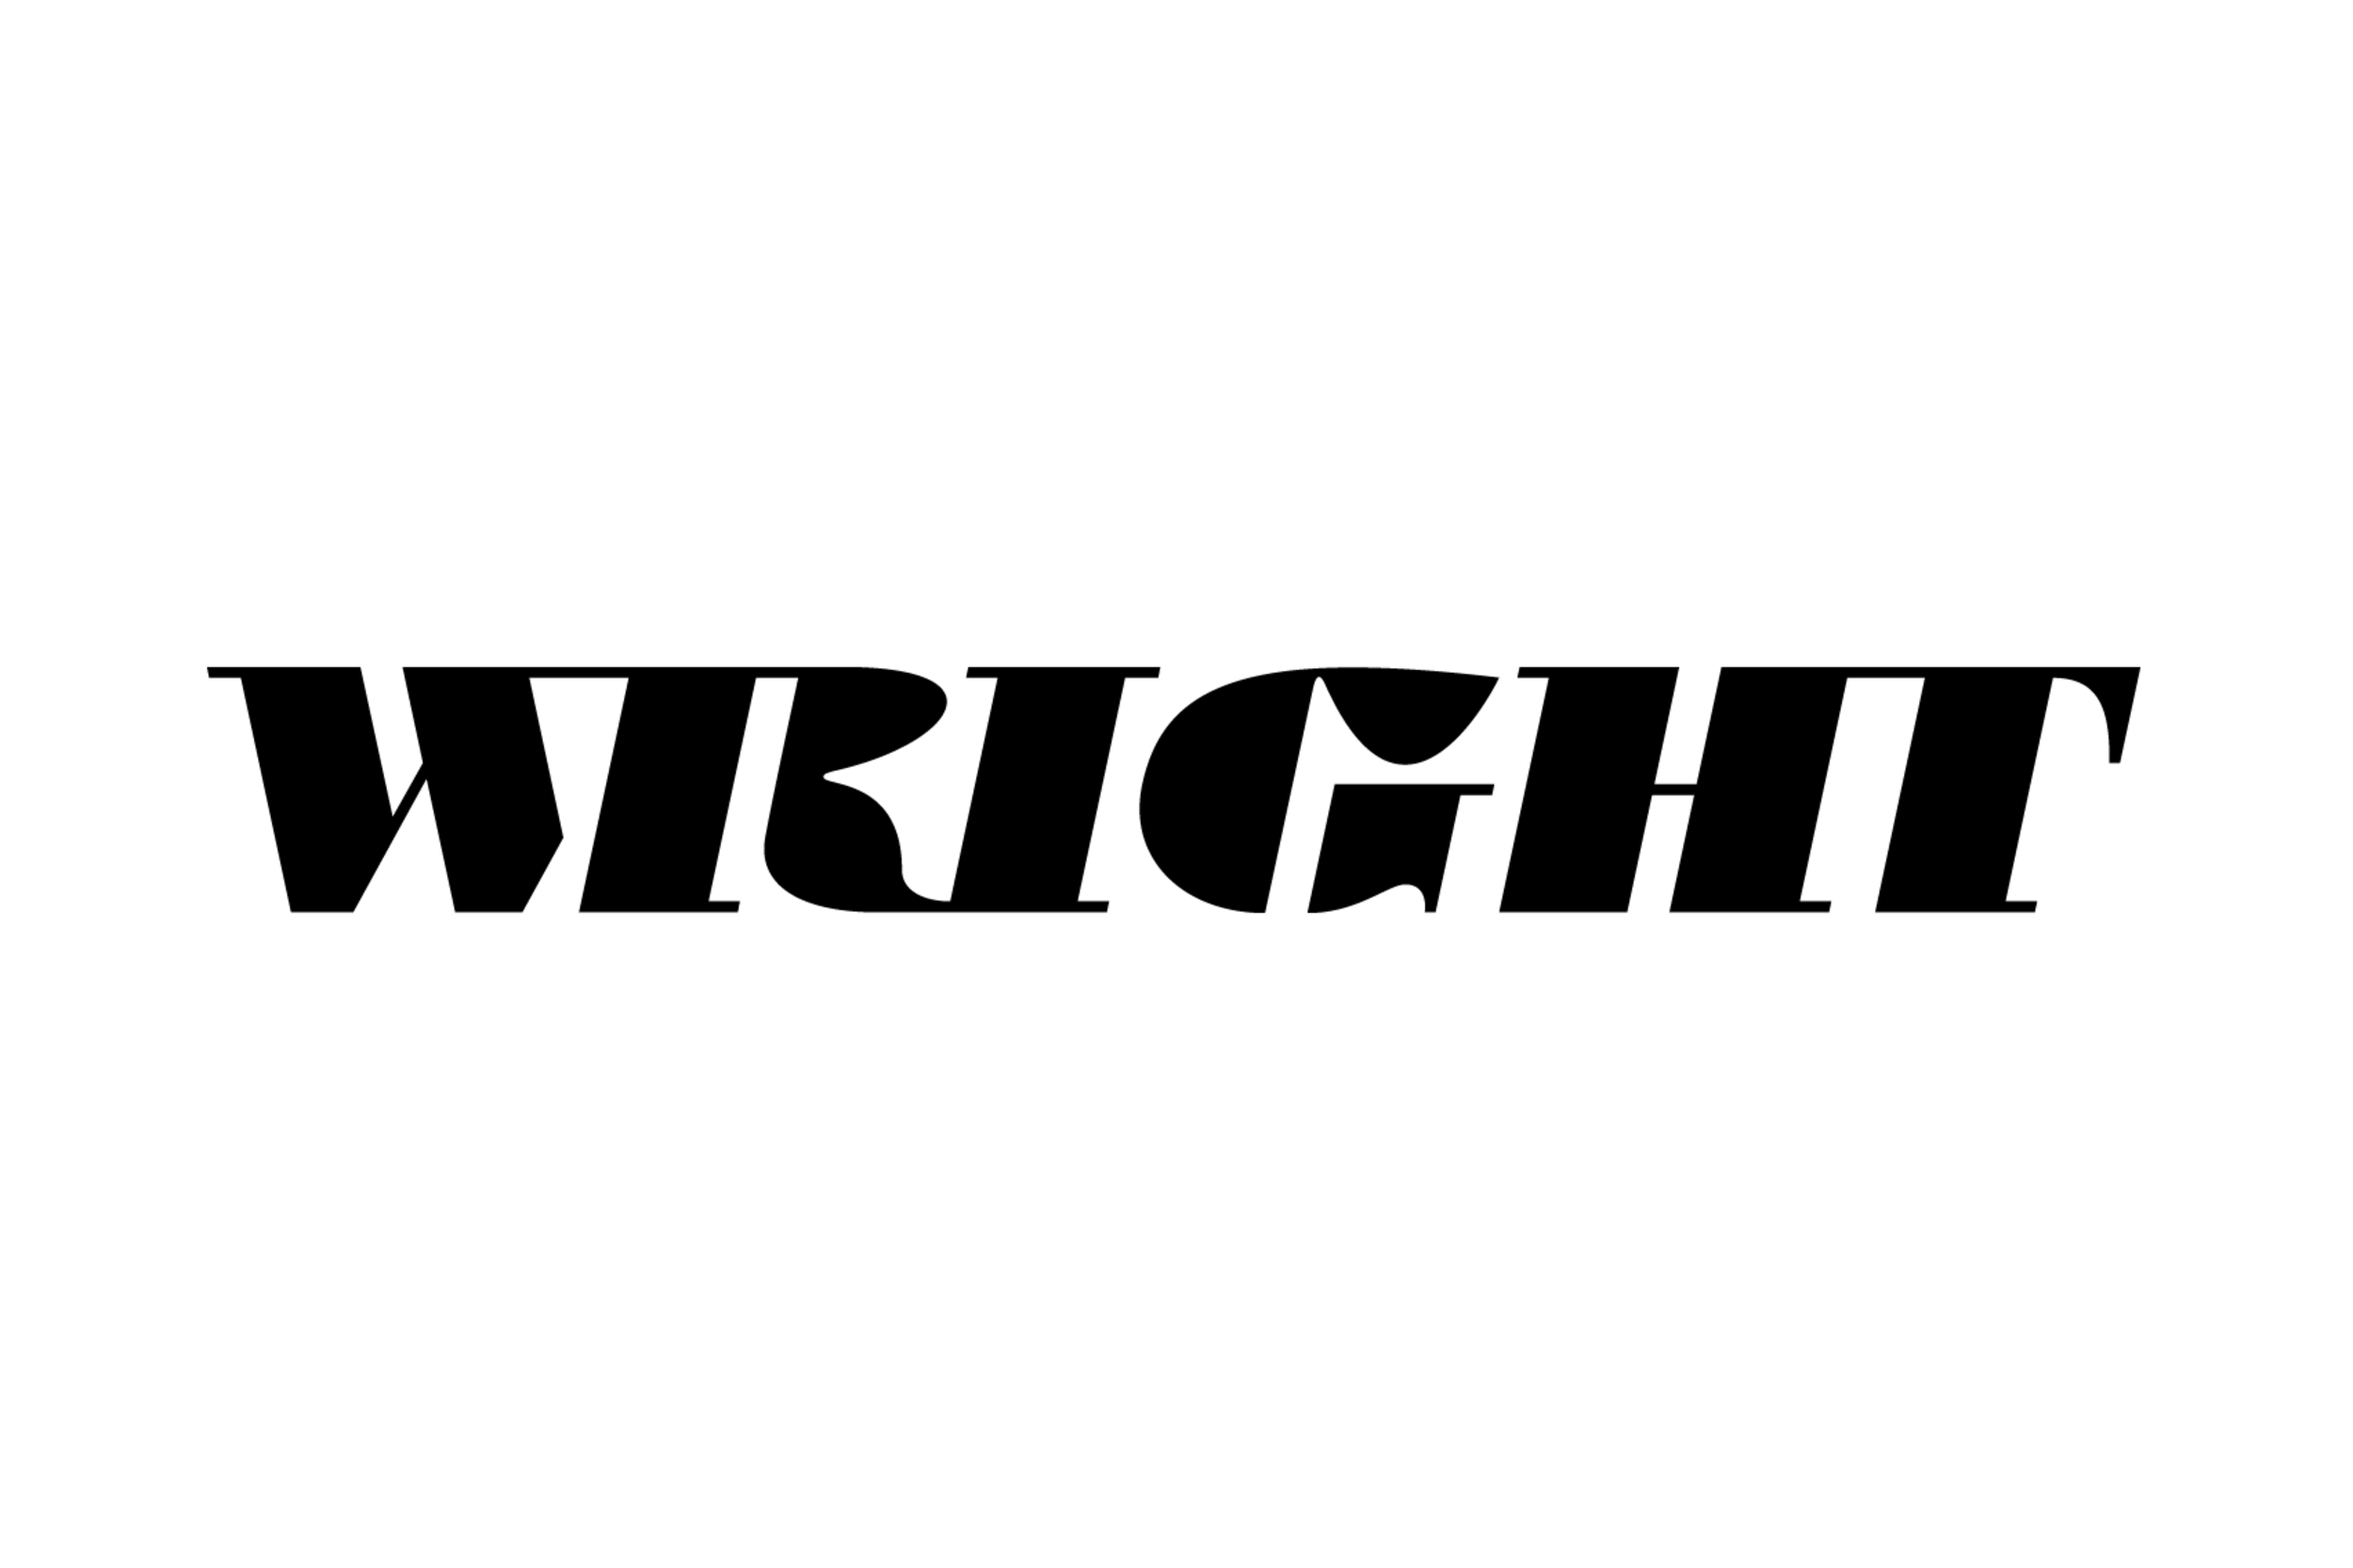 Wright Logo - Thirst. Wright Identity and Publications